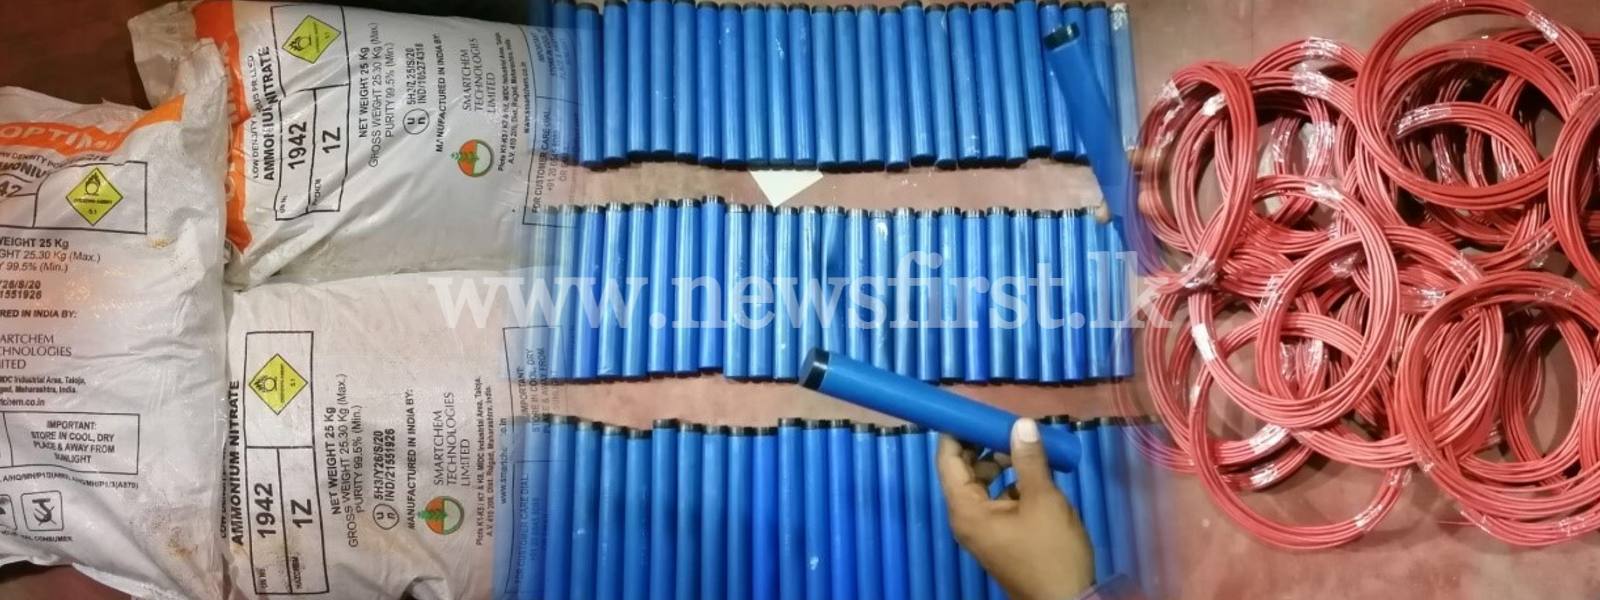 STF arrests man with illegal explosive material